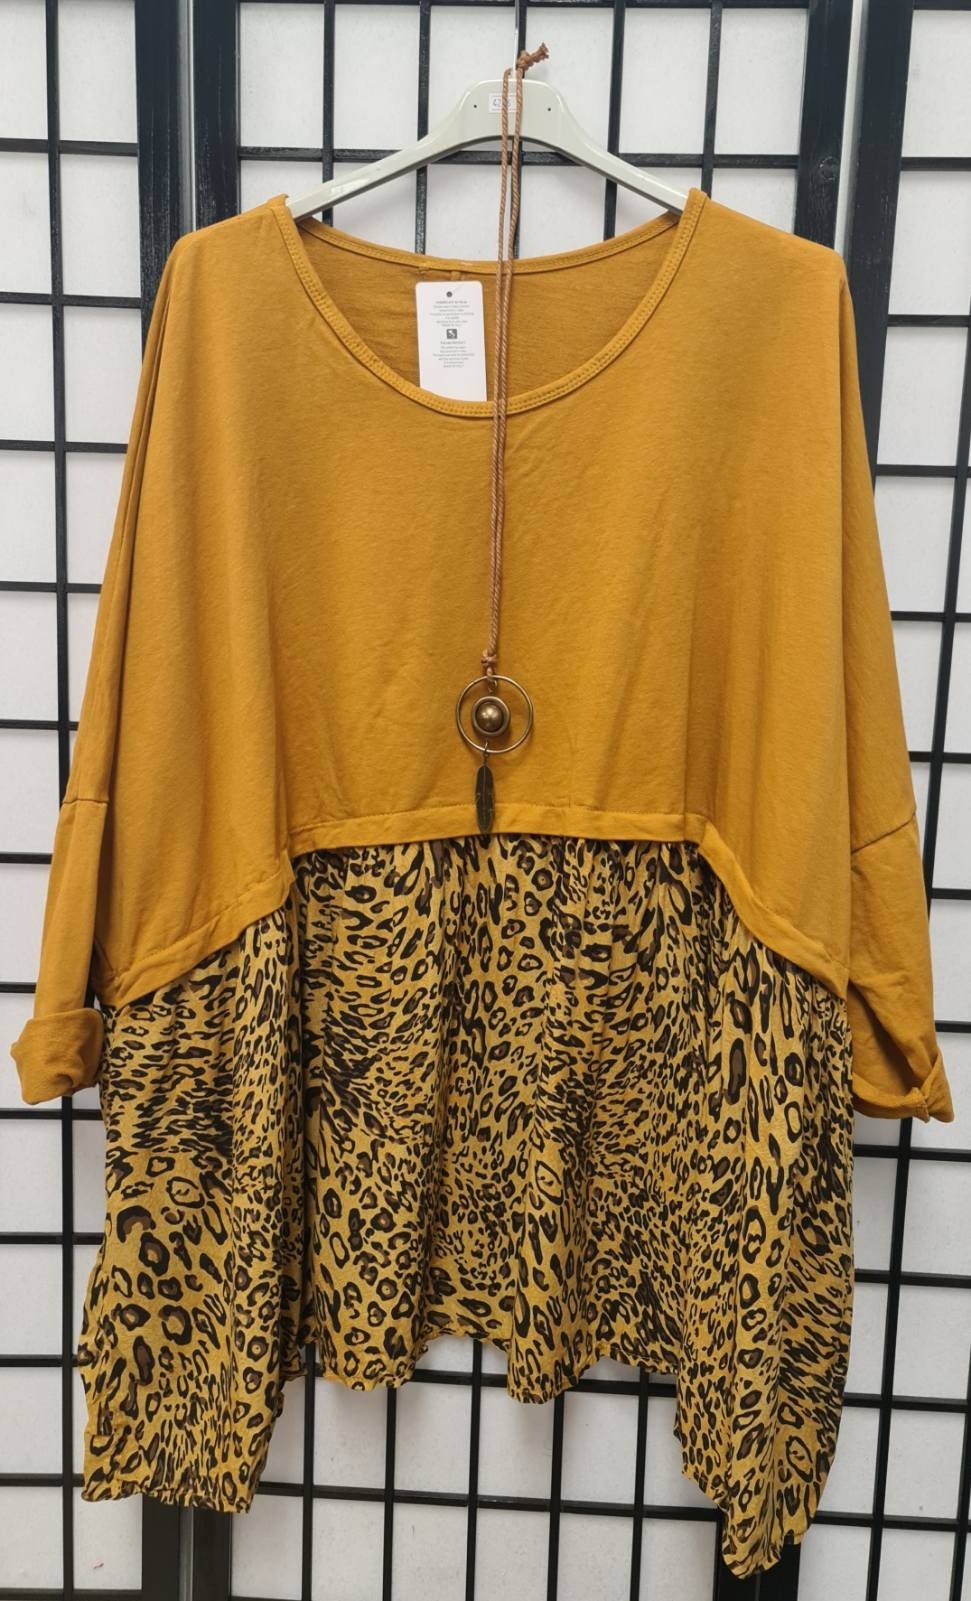 Italian Leopard Plain And Leopard Print Top With Necklace